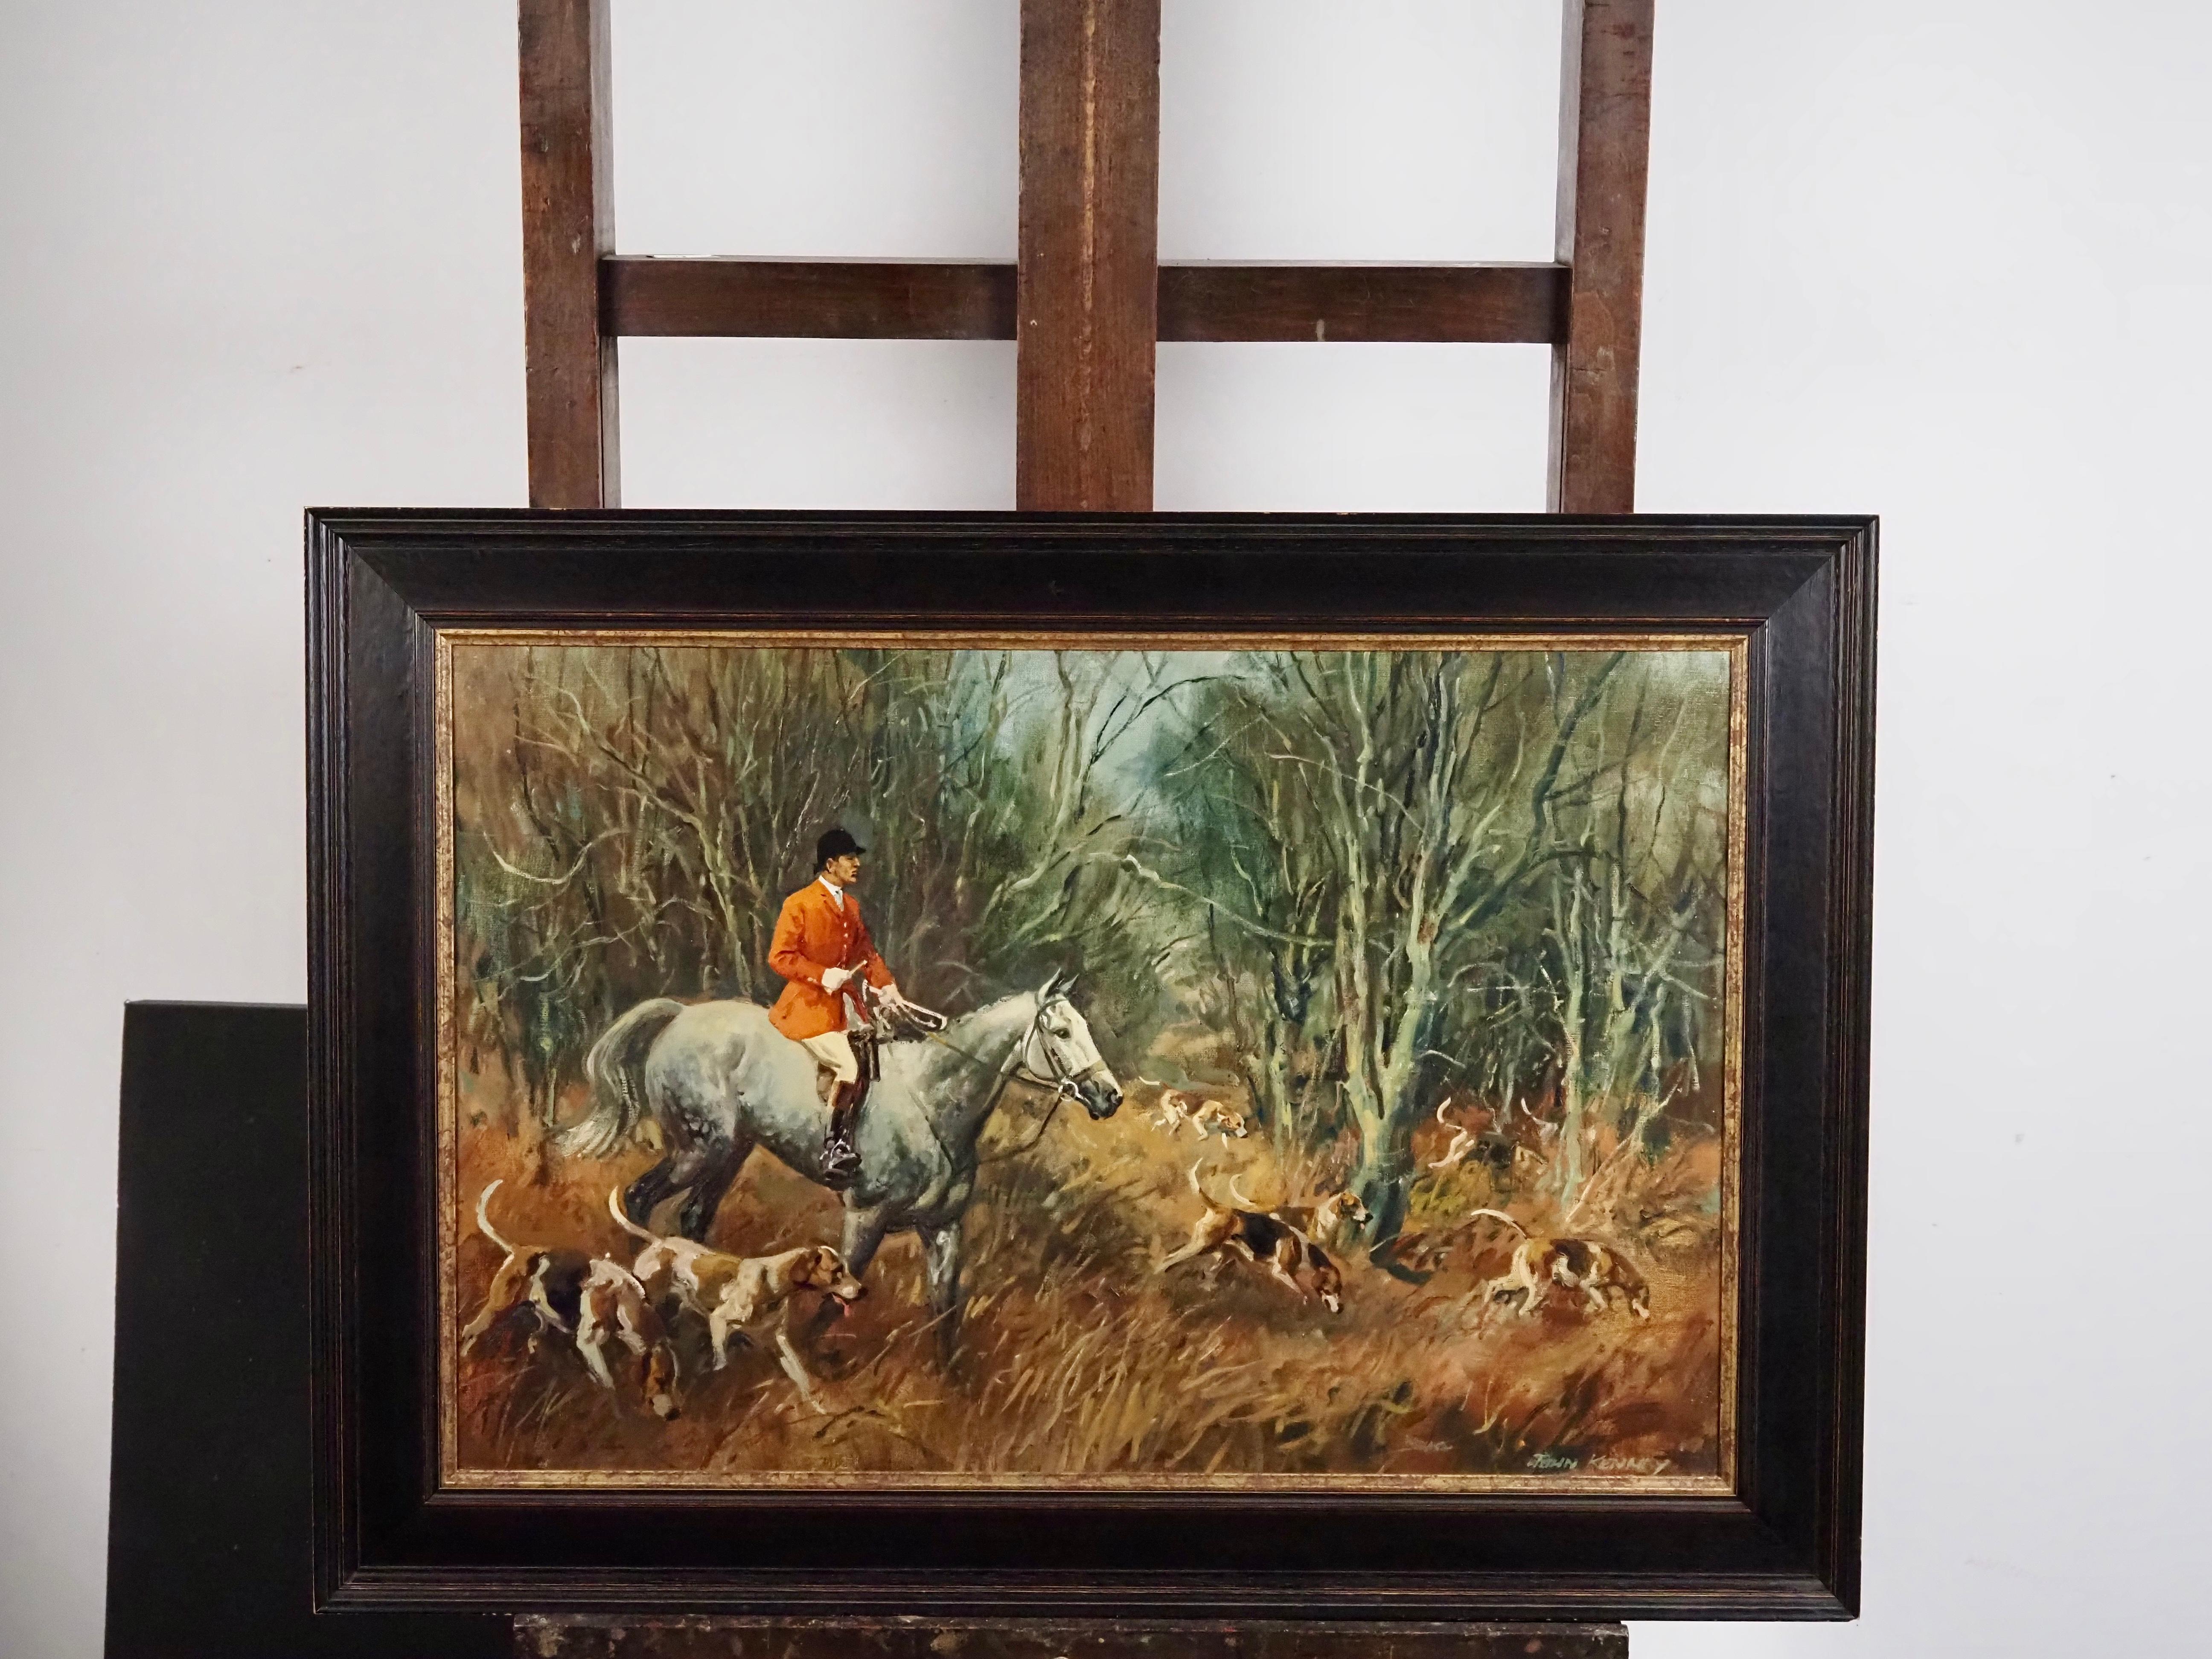 John Theodore Eardley Kenney (1911-1972)
On the scent
signed 'John Kenney' lower right
Oil on canvas
Canvas - 20 x 30 in
Framed - 25 x 35 in

Introducing John Kenney: Celebrated Sporting Artist of the 20th Century

Discover the captivating artistry